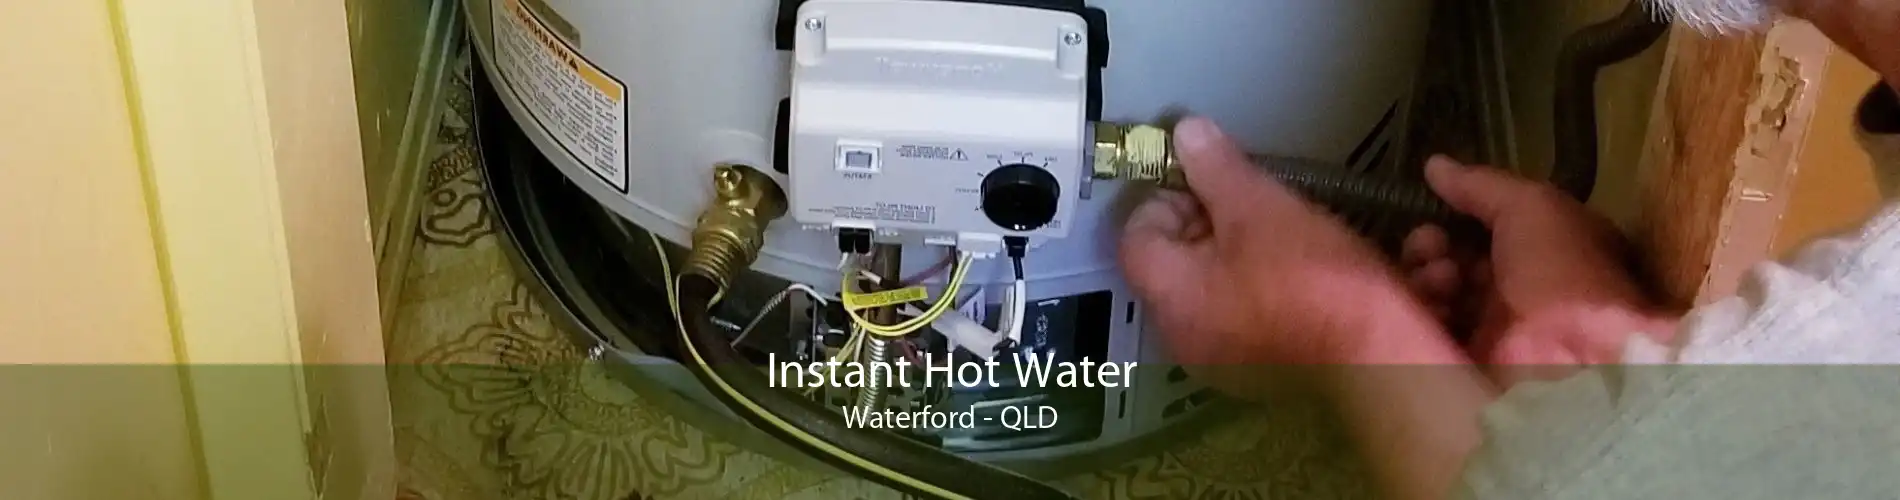 Instant Hot Water Waterford - QLD